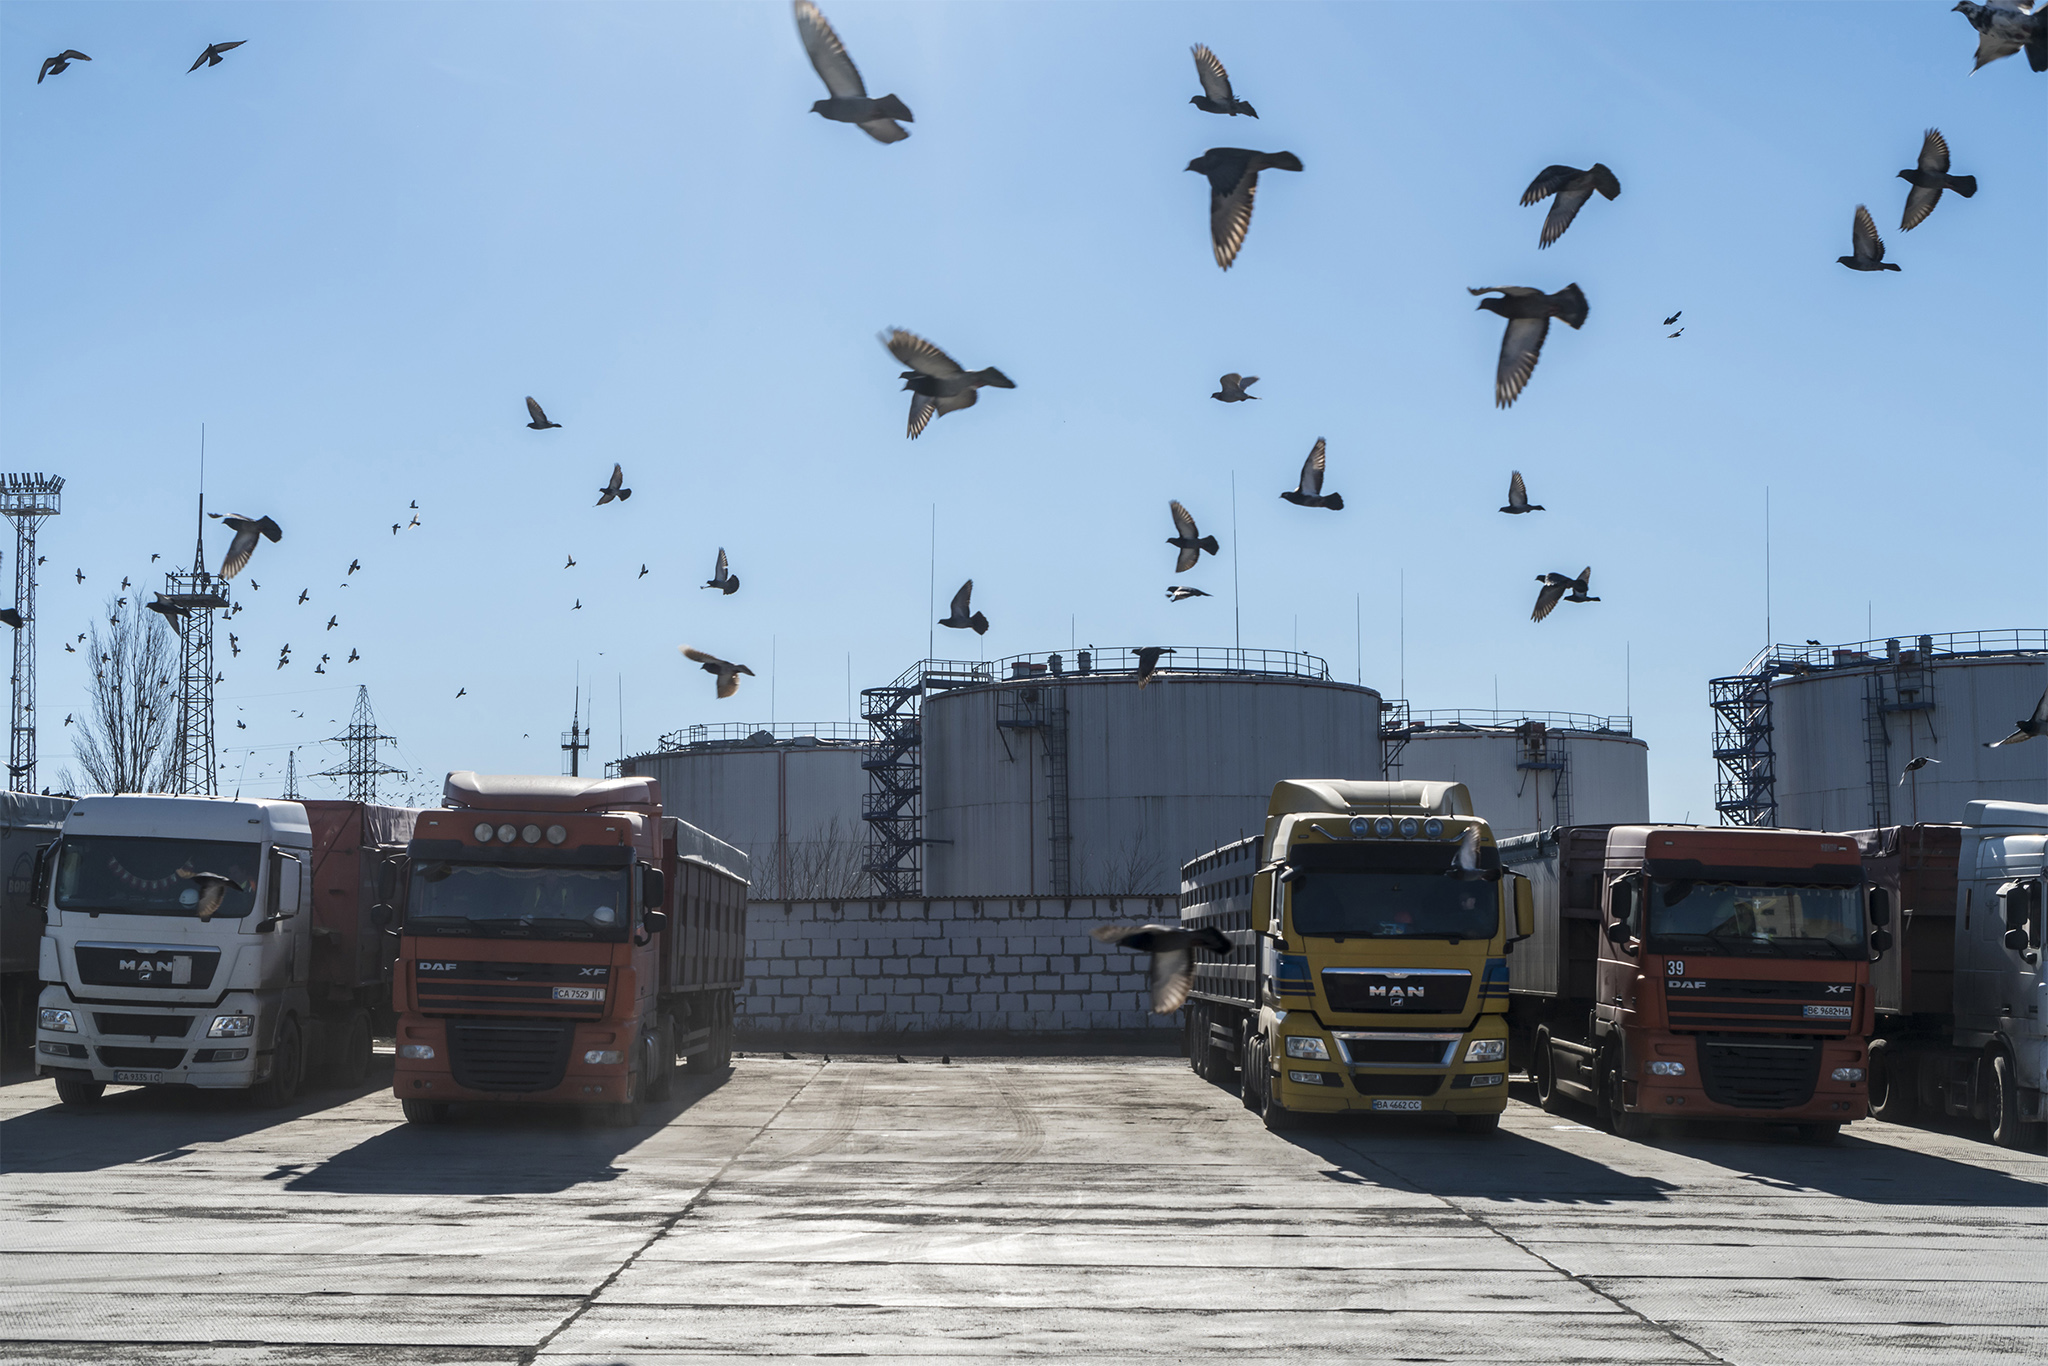 Trucks loaded with wheat at the Port of Mykolaiv in Ukraine, Feb. 14, 2022. The U.N. warned on April 16 that closures of ports on the Black Sea could trigger a global food catastrophe that yields starvation, mass migration and political instability. (Brendan Hoffman/The New York Times)